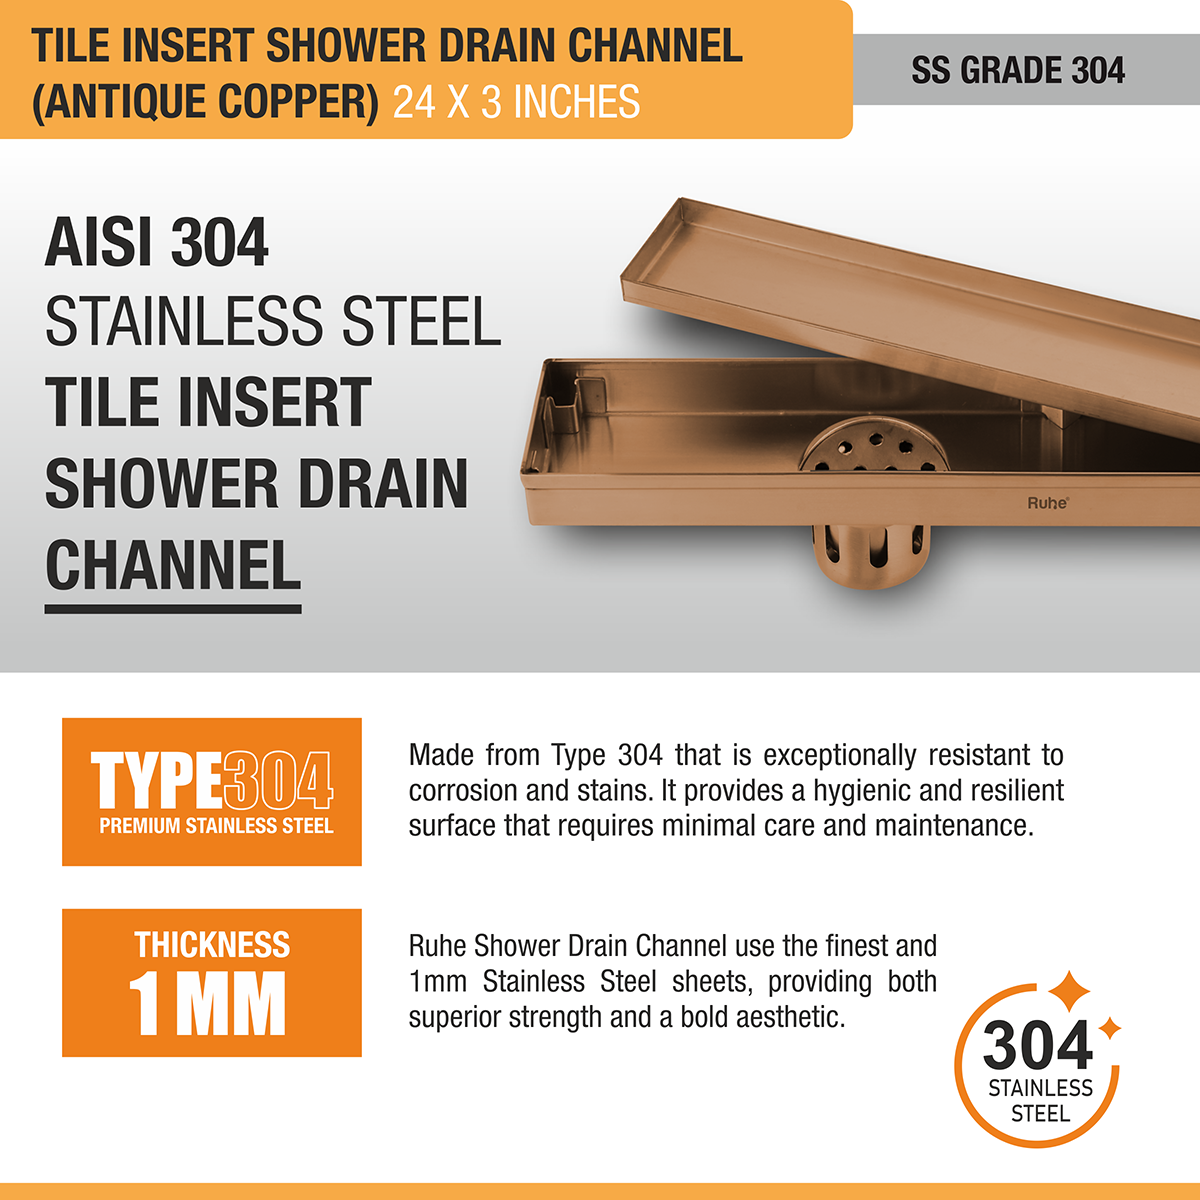 Tile Insert Shower Drain Channel (24 x 3 Inches) ROSE GOLD PVD Coated stainless steel